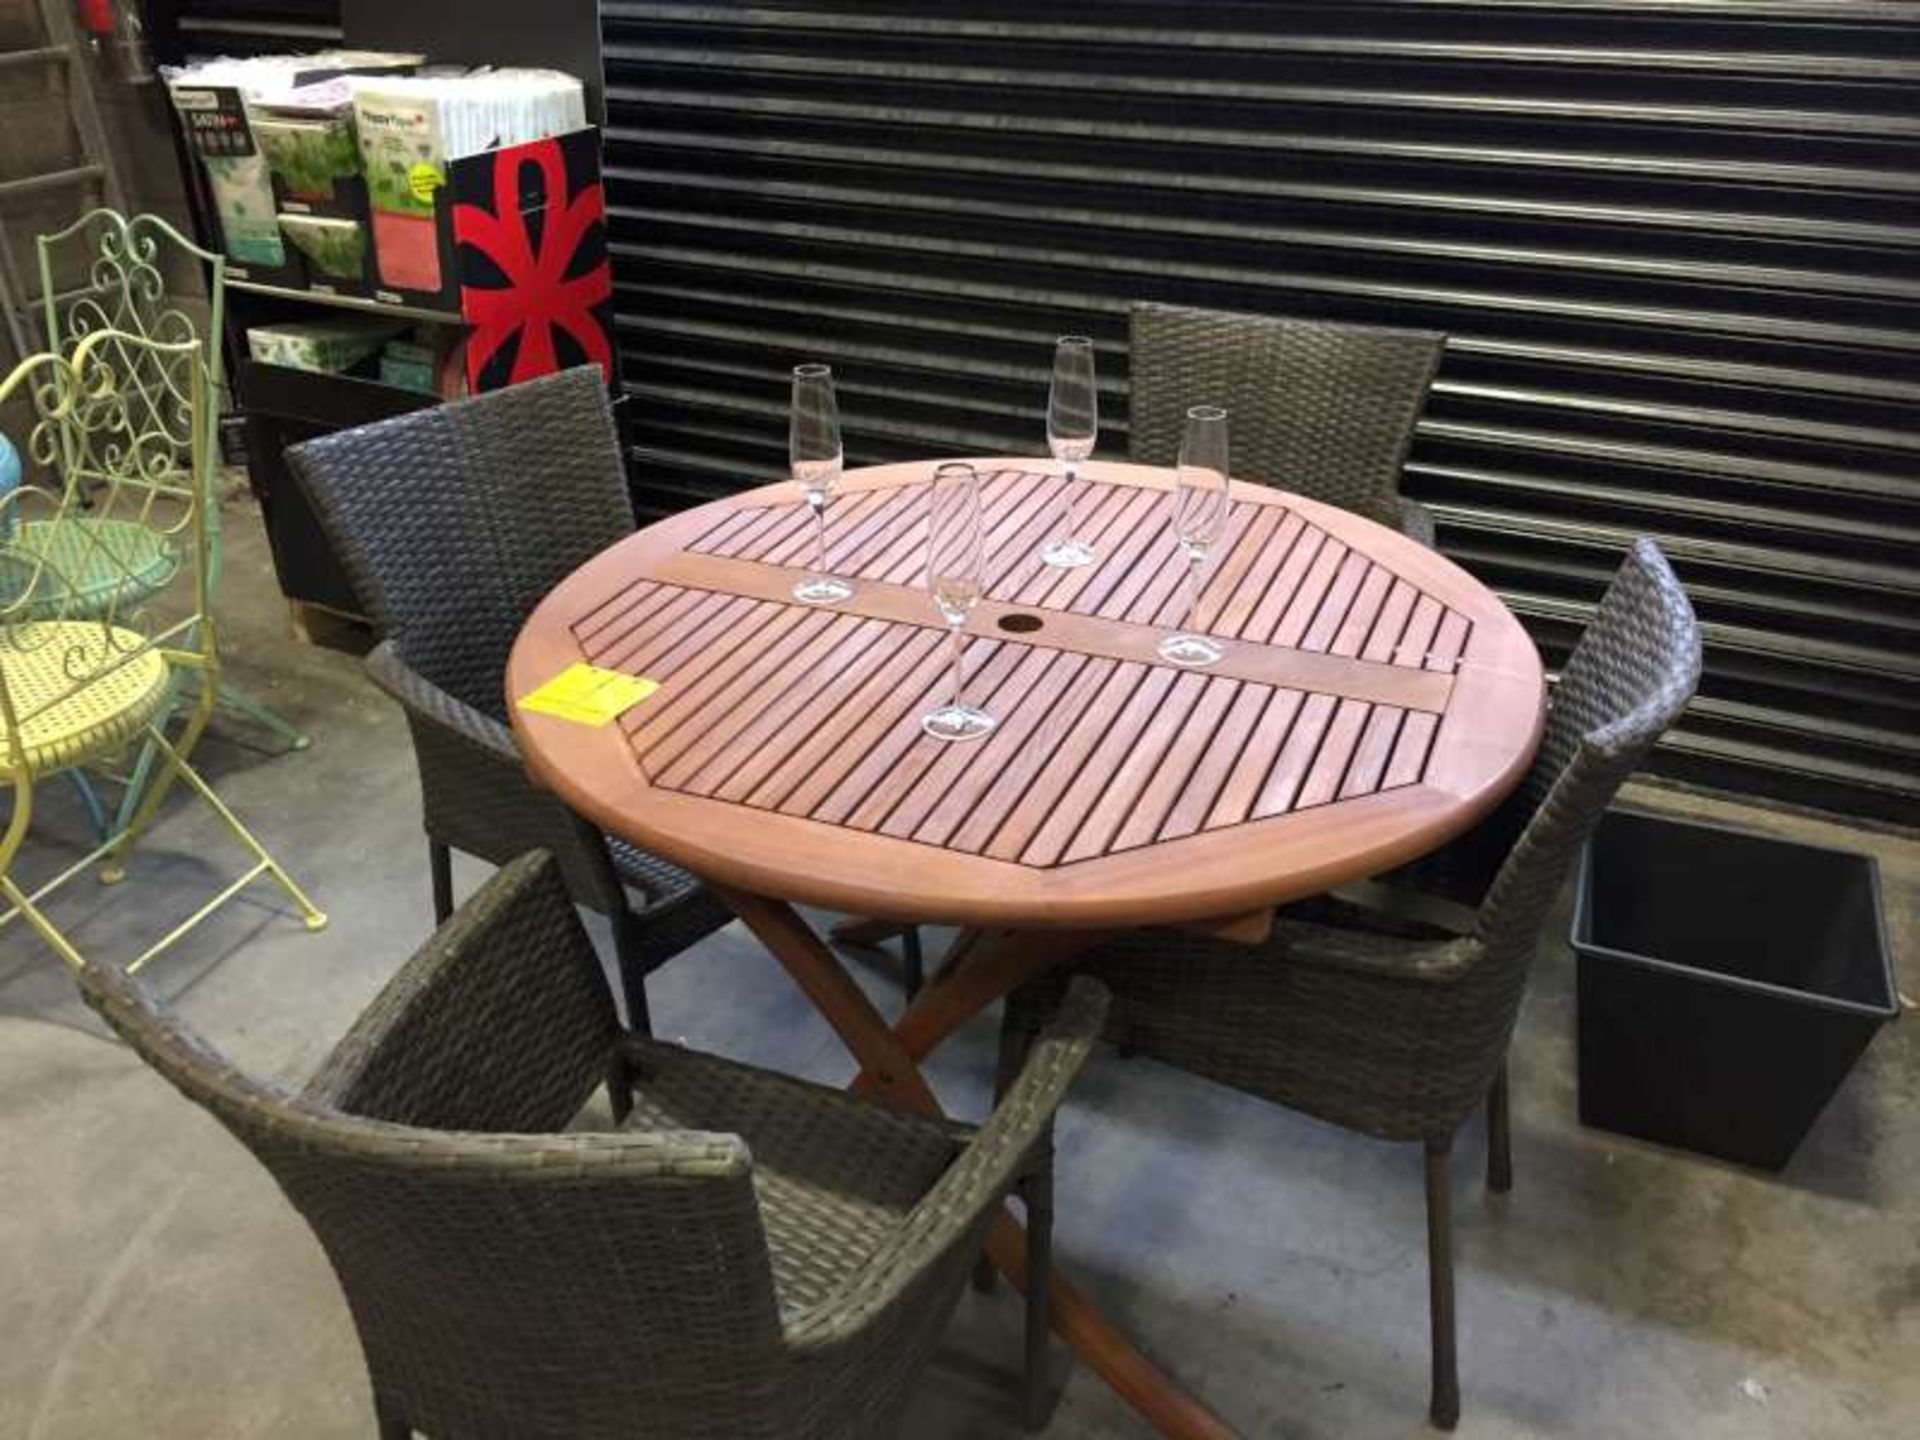 BRAND NEW BOXED PERU ROUND GARDEN TABLE WITH 4 X GARDEN CHAIRS